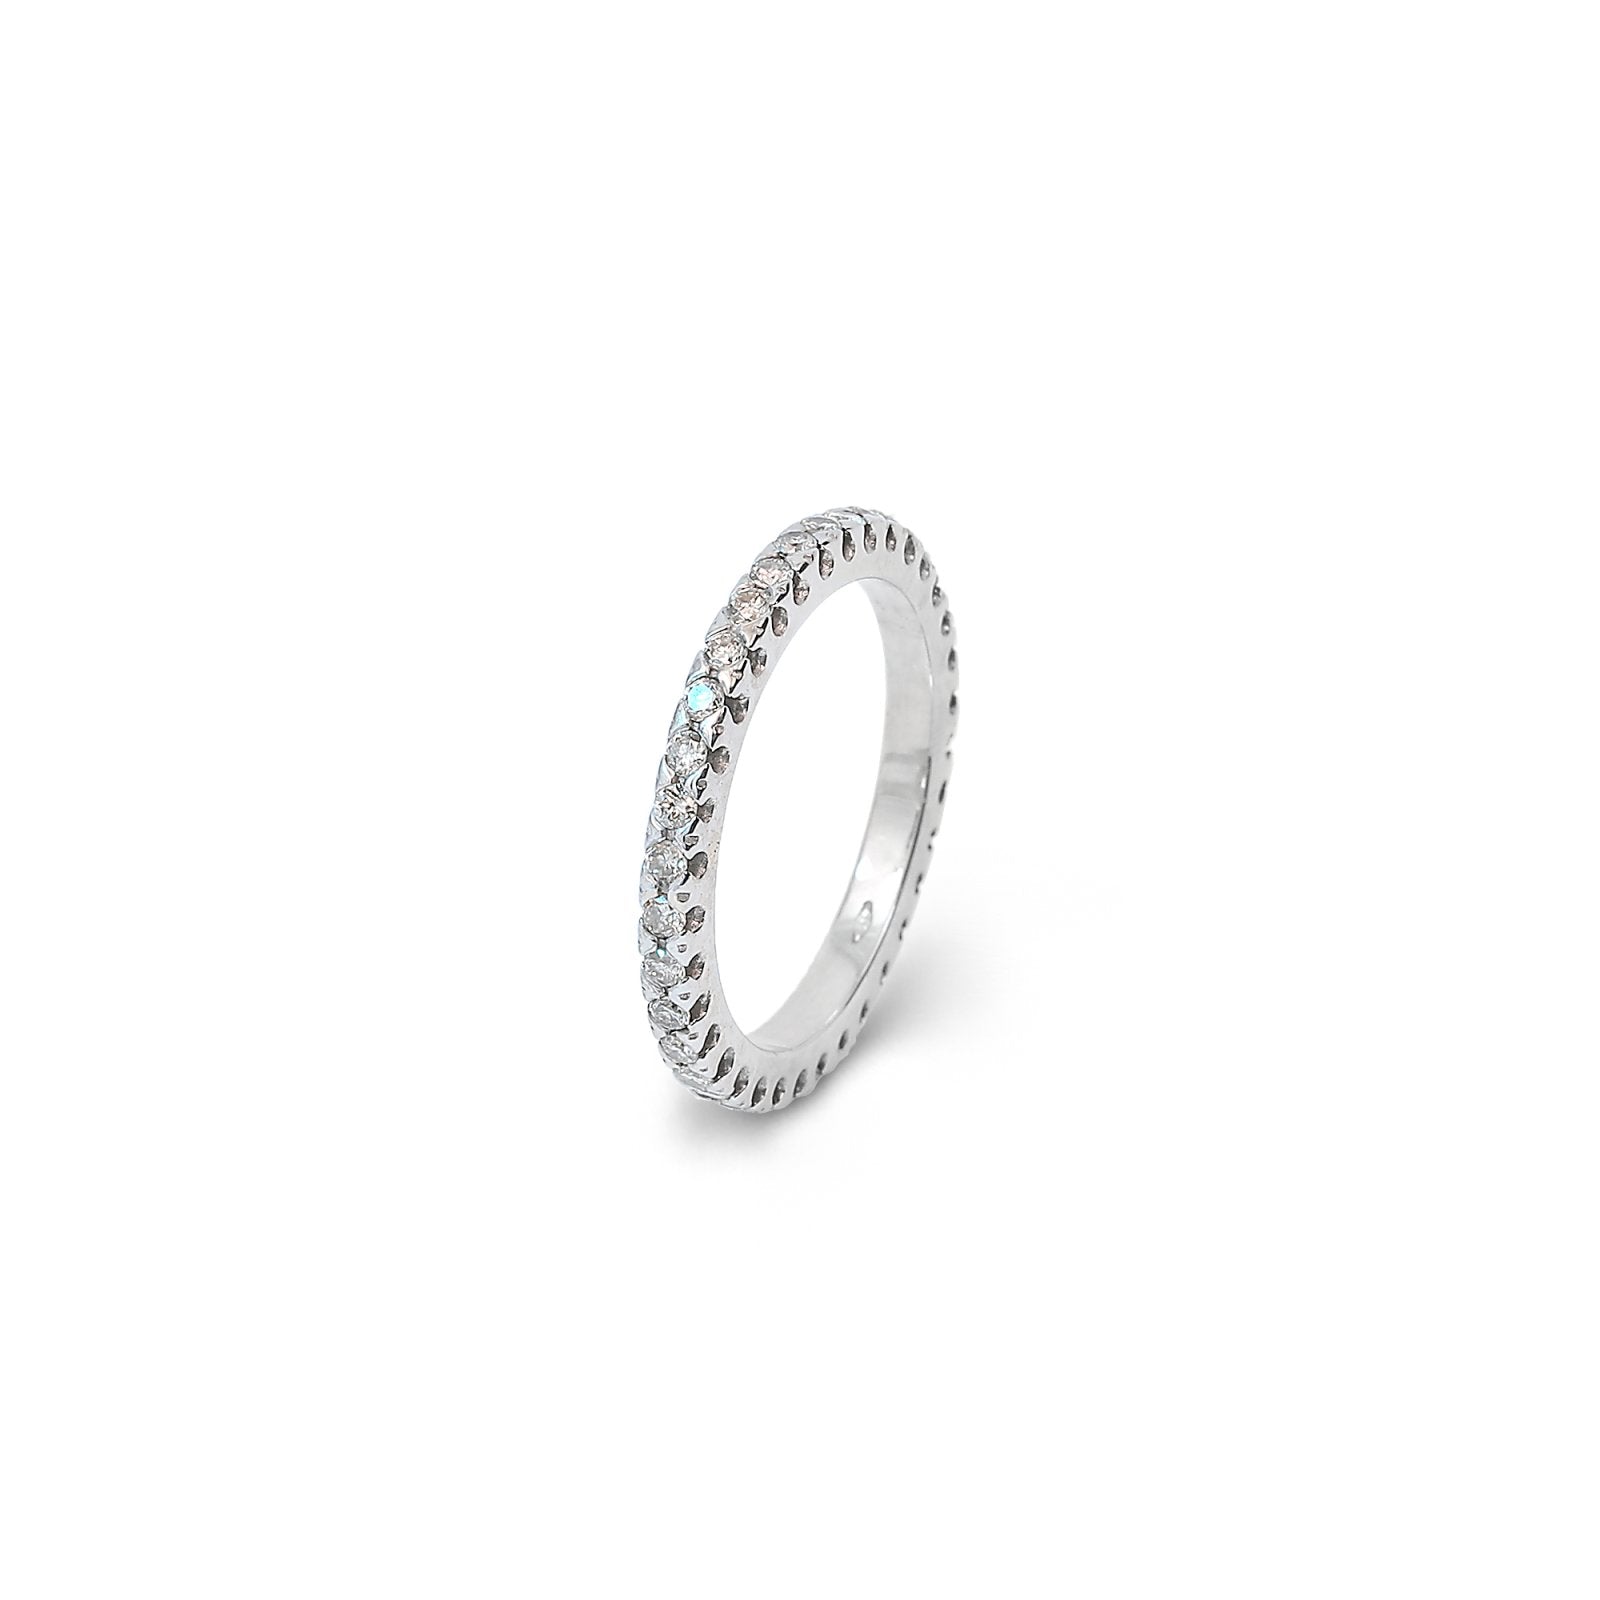 White Gold Eternity Band with 40 Round Cut Diamonds TCW:0.4ct SI G-H 18k 2.5gr